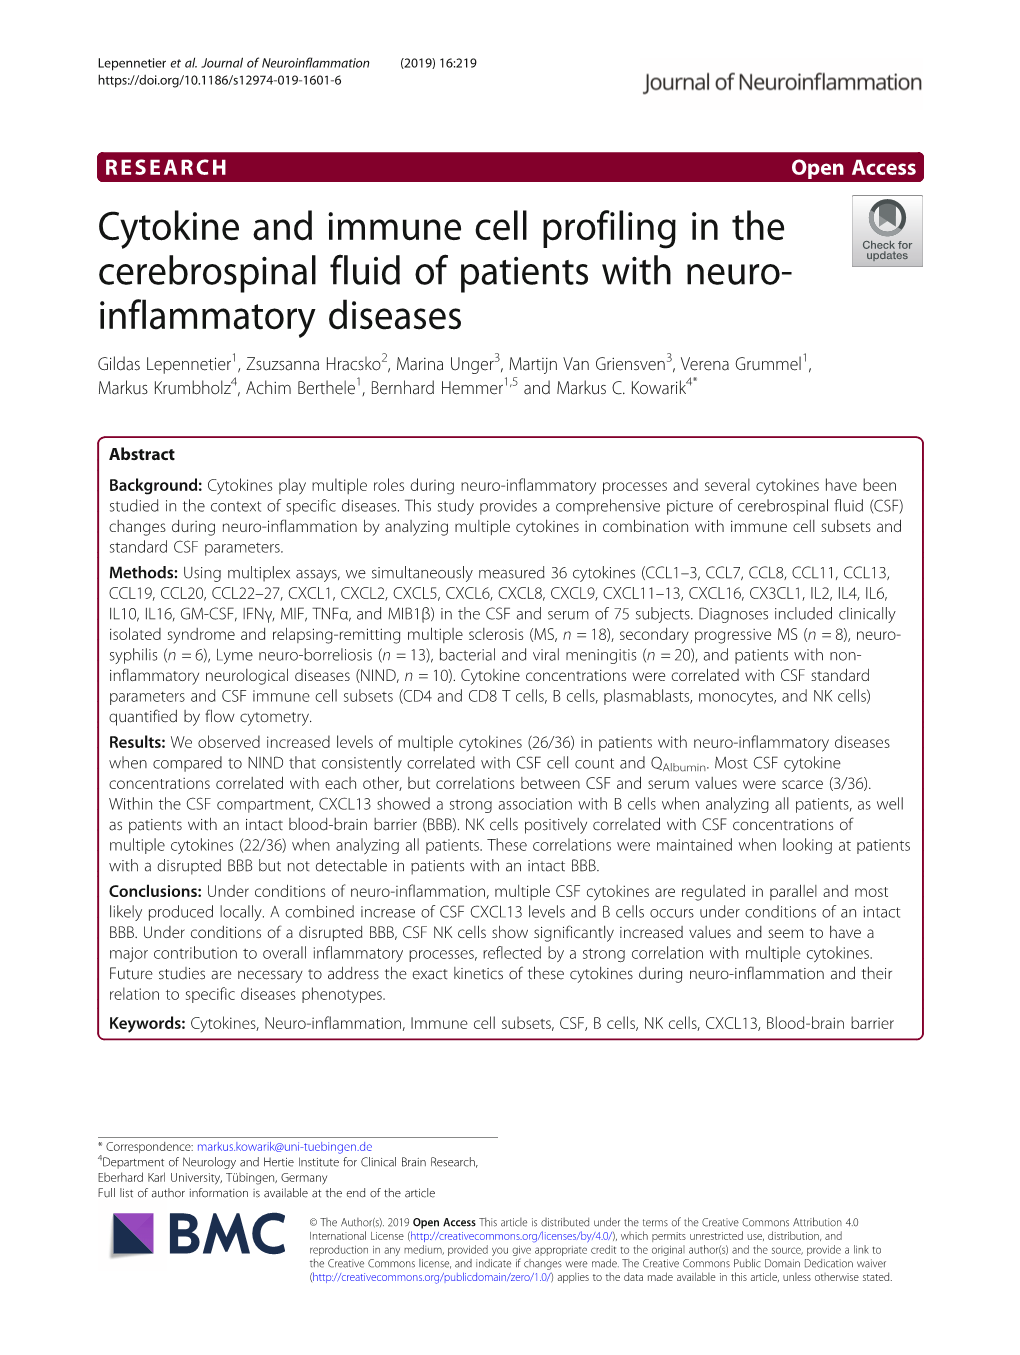 Cytokine and Immune Cell Profiling in the Cerebrospinal Fluid of Patients